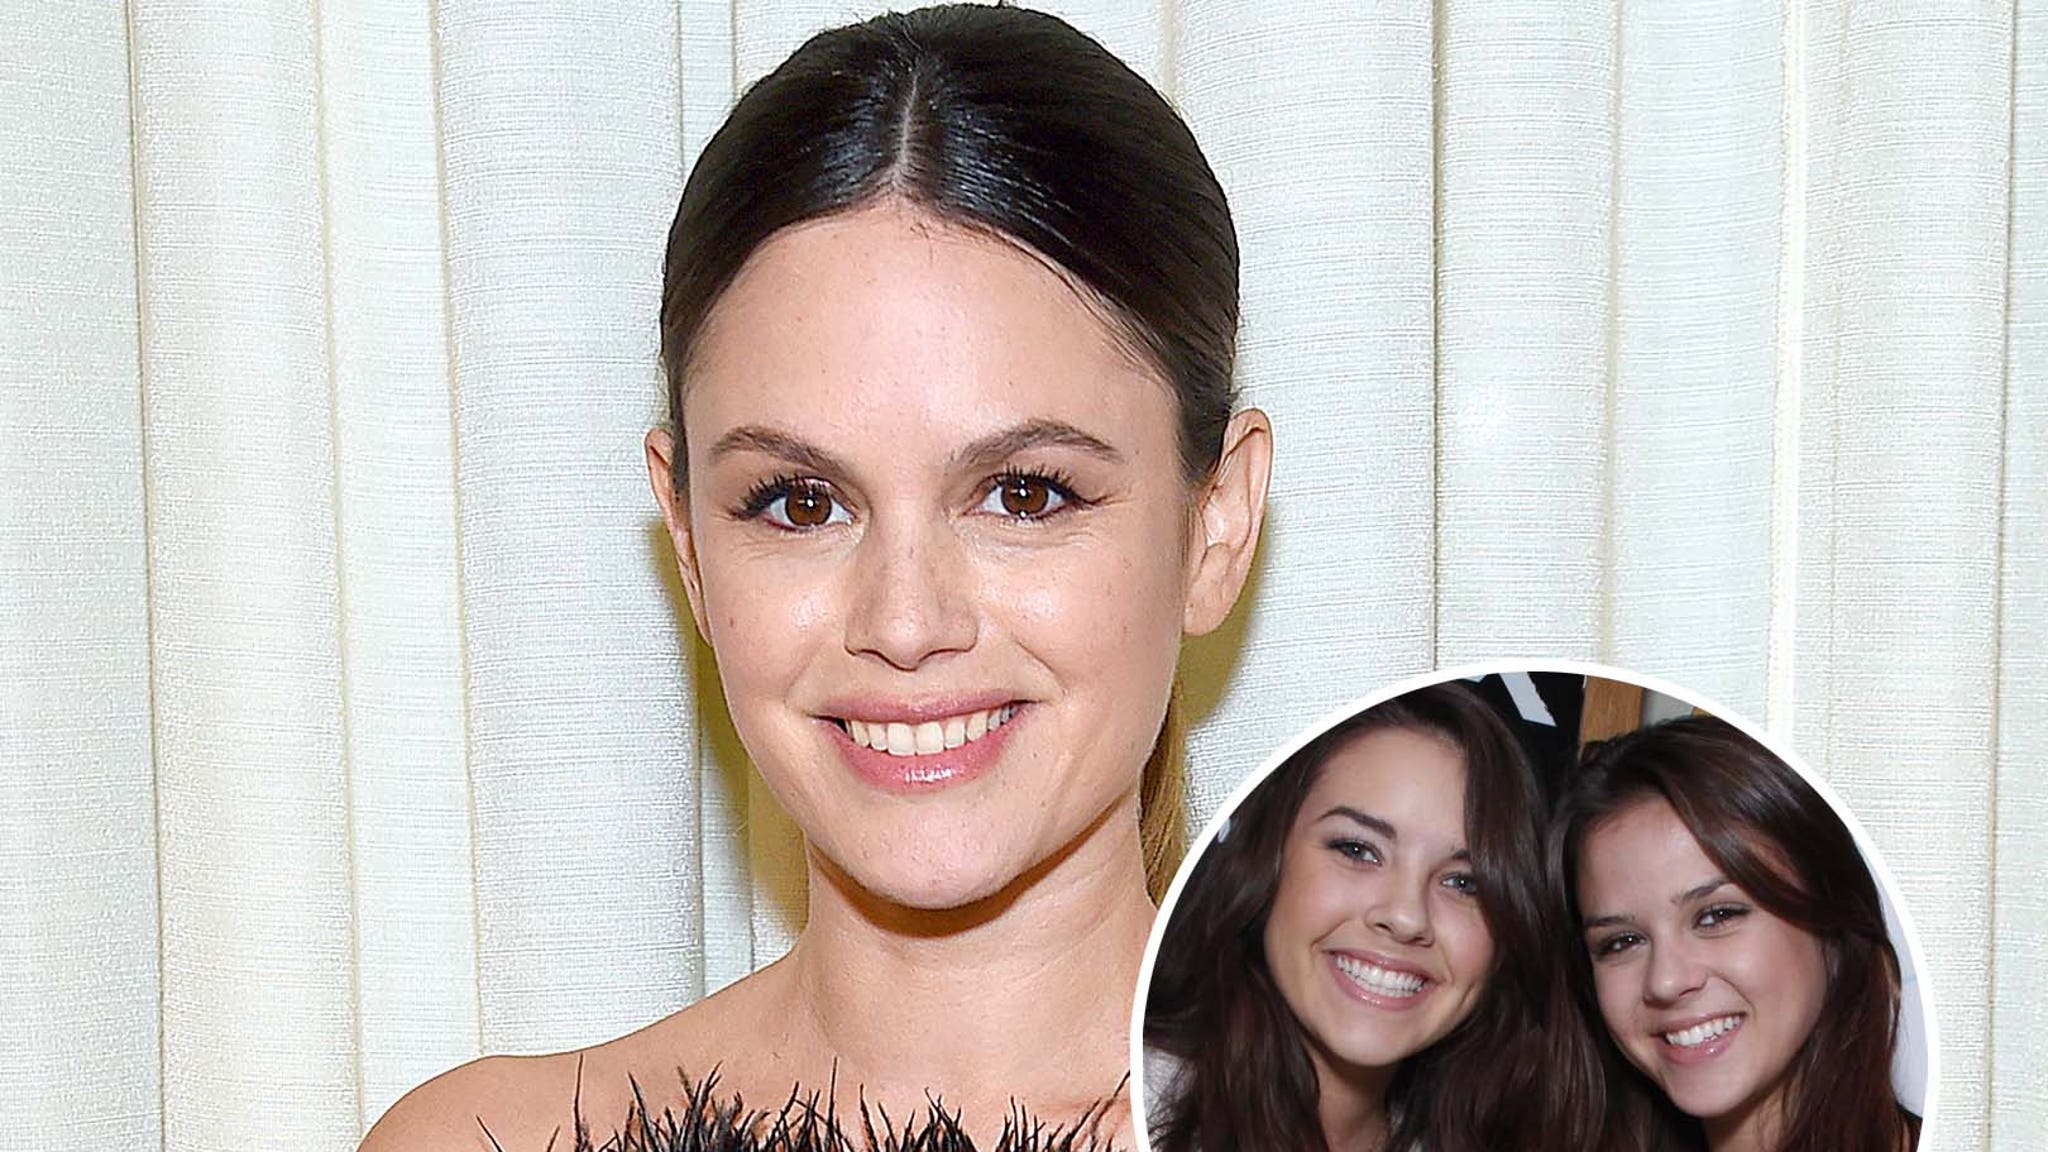 Rachel Bilson Confronts 'Bling Ring' Sisters Alexis and Gabrielle Neiers Who Robbed Her